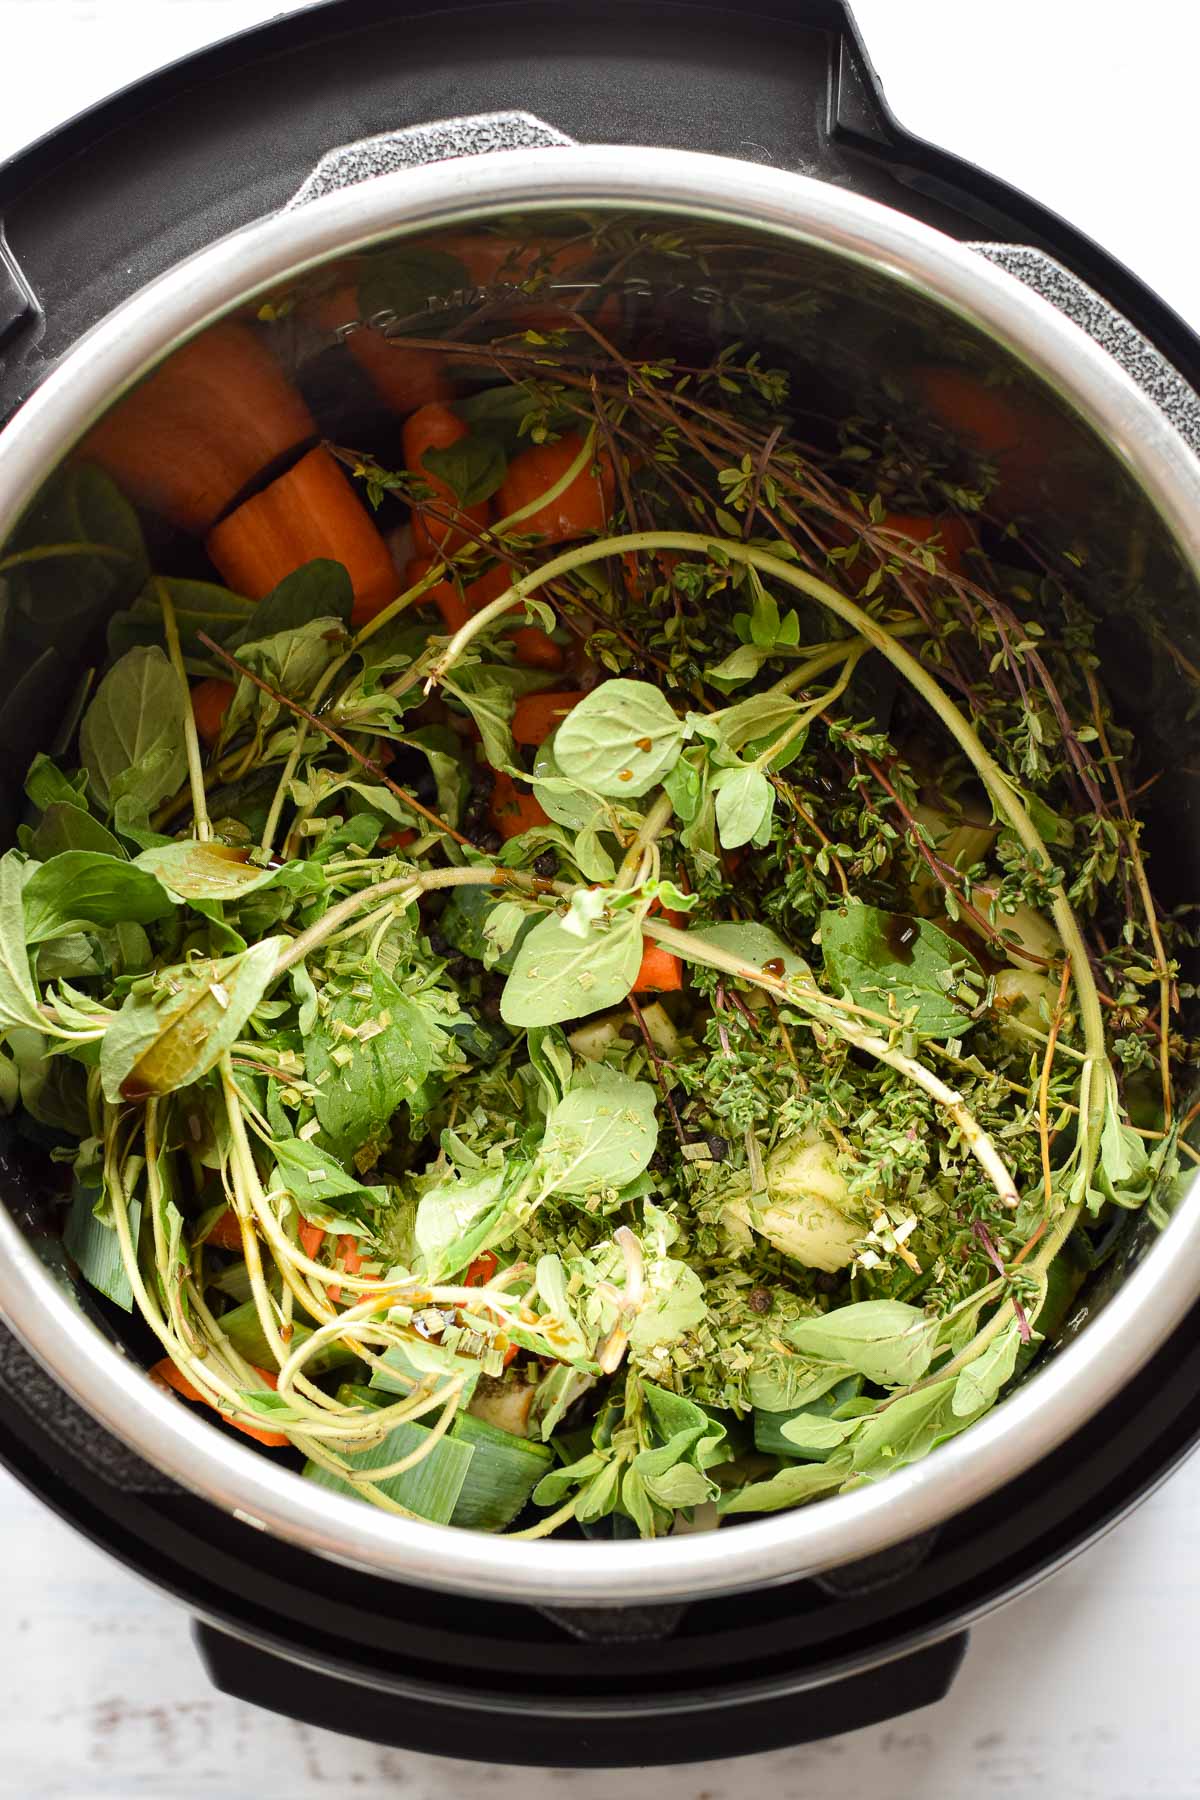 overhead shot of the instant pot once herbs, seasonings, and produce have been added to make low fodmap beef broth.